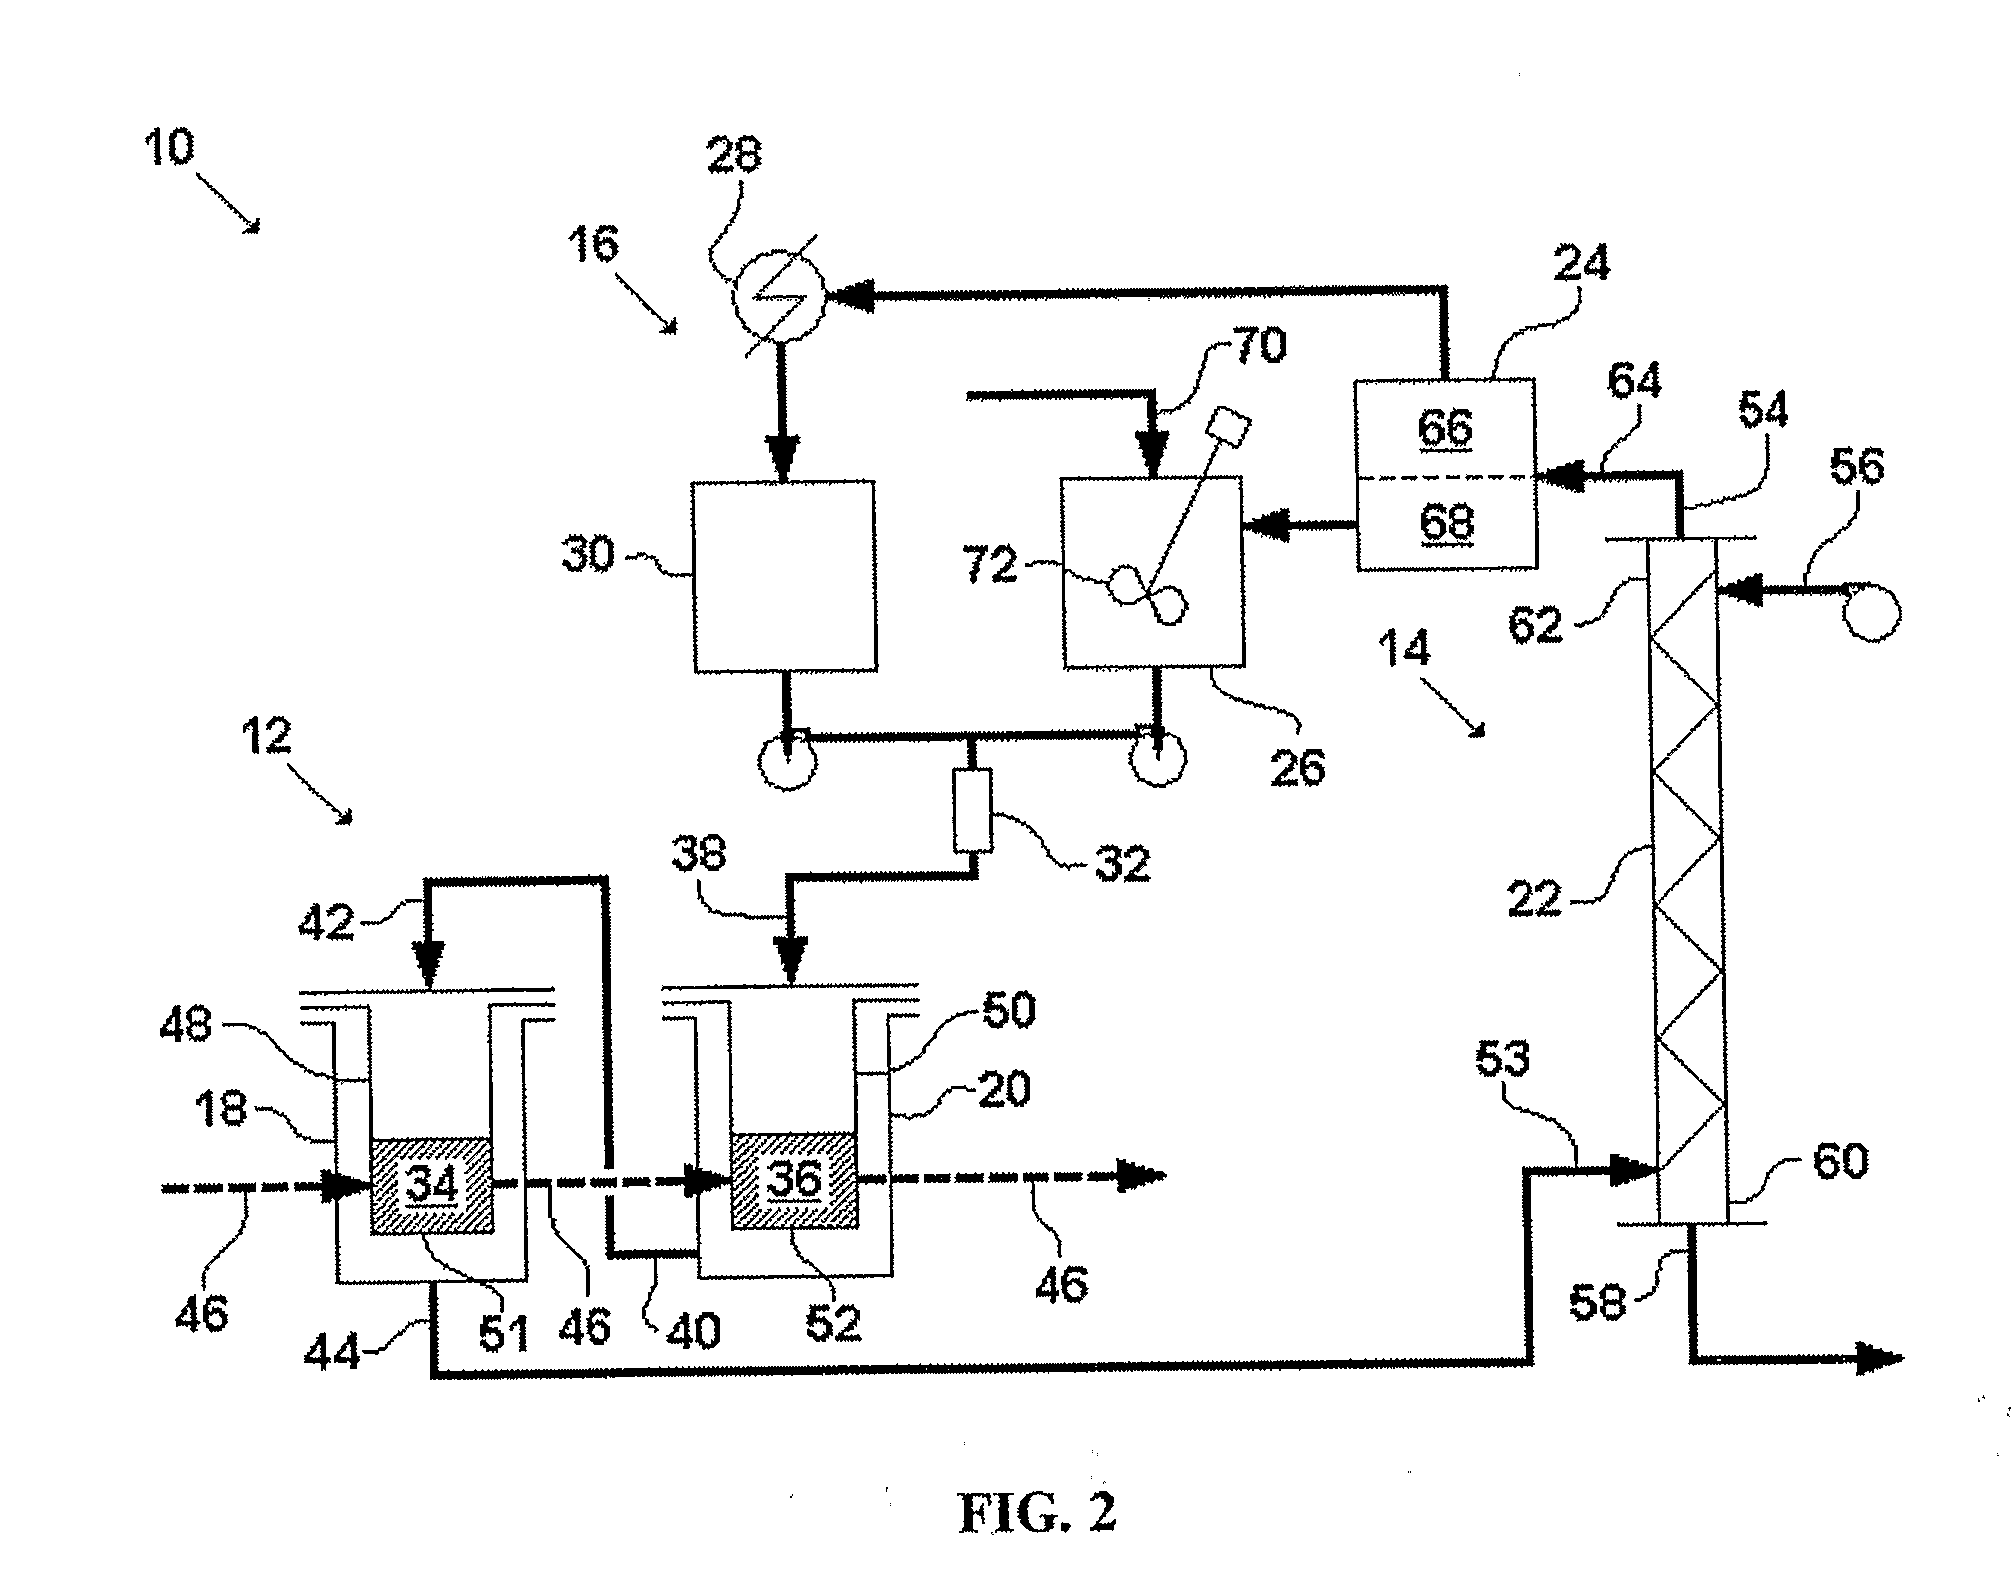 Method and System for Recovering Metal from Metal-Containing Materials